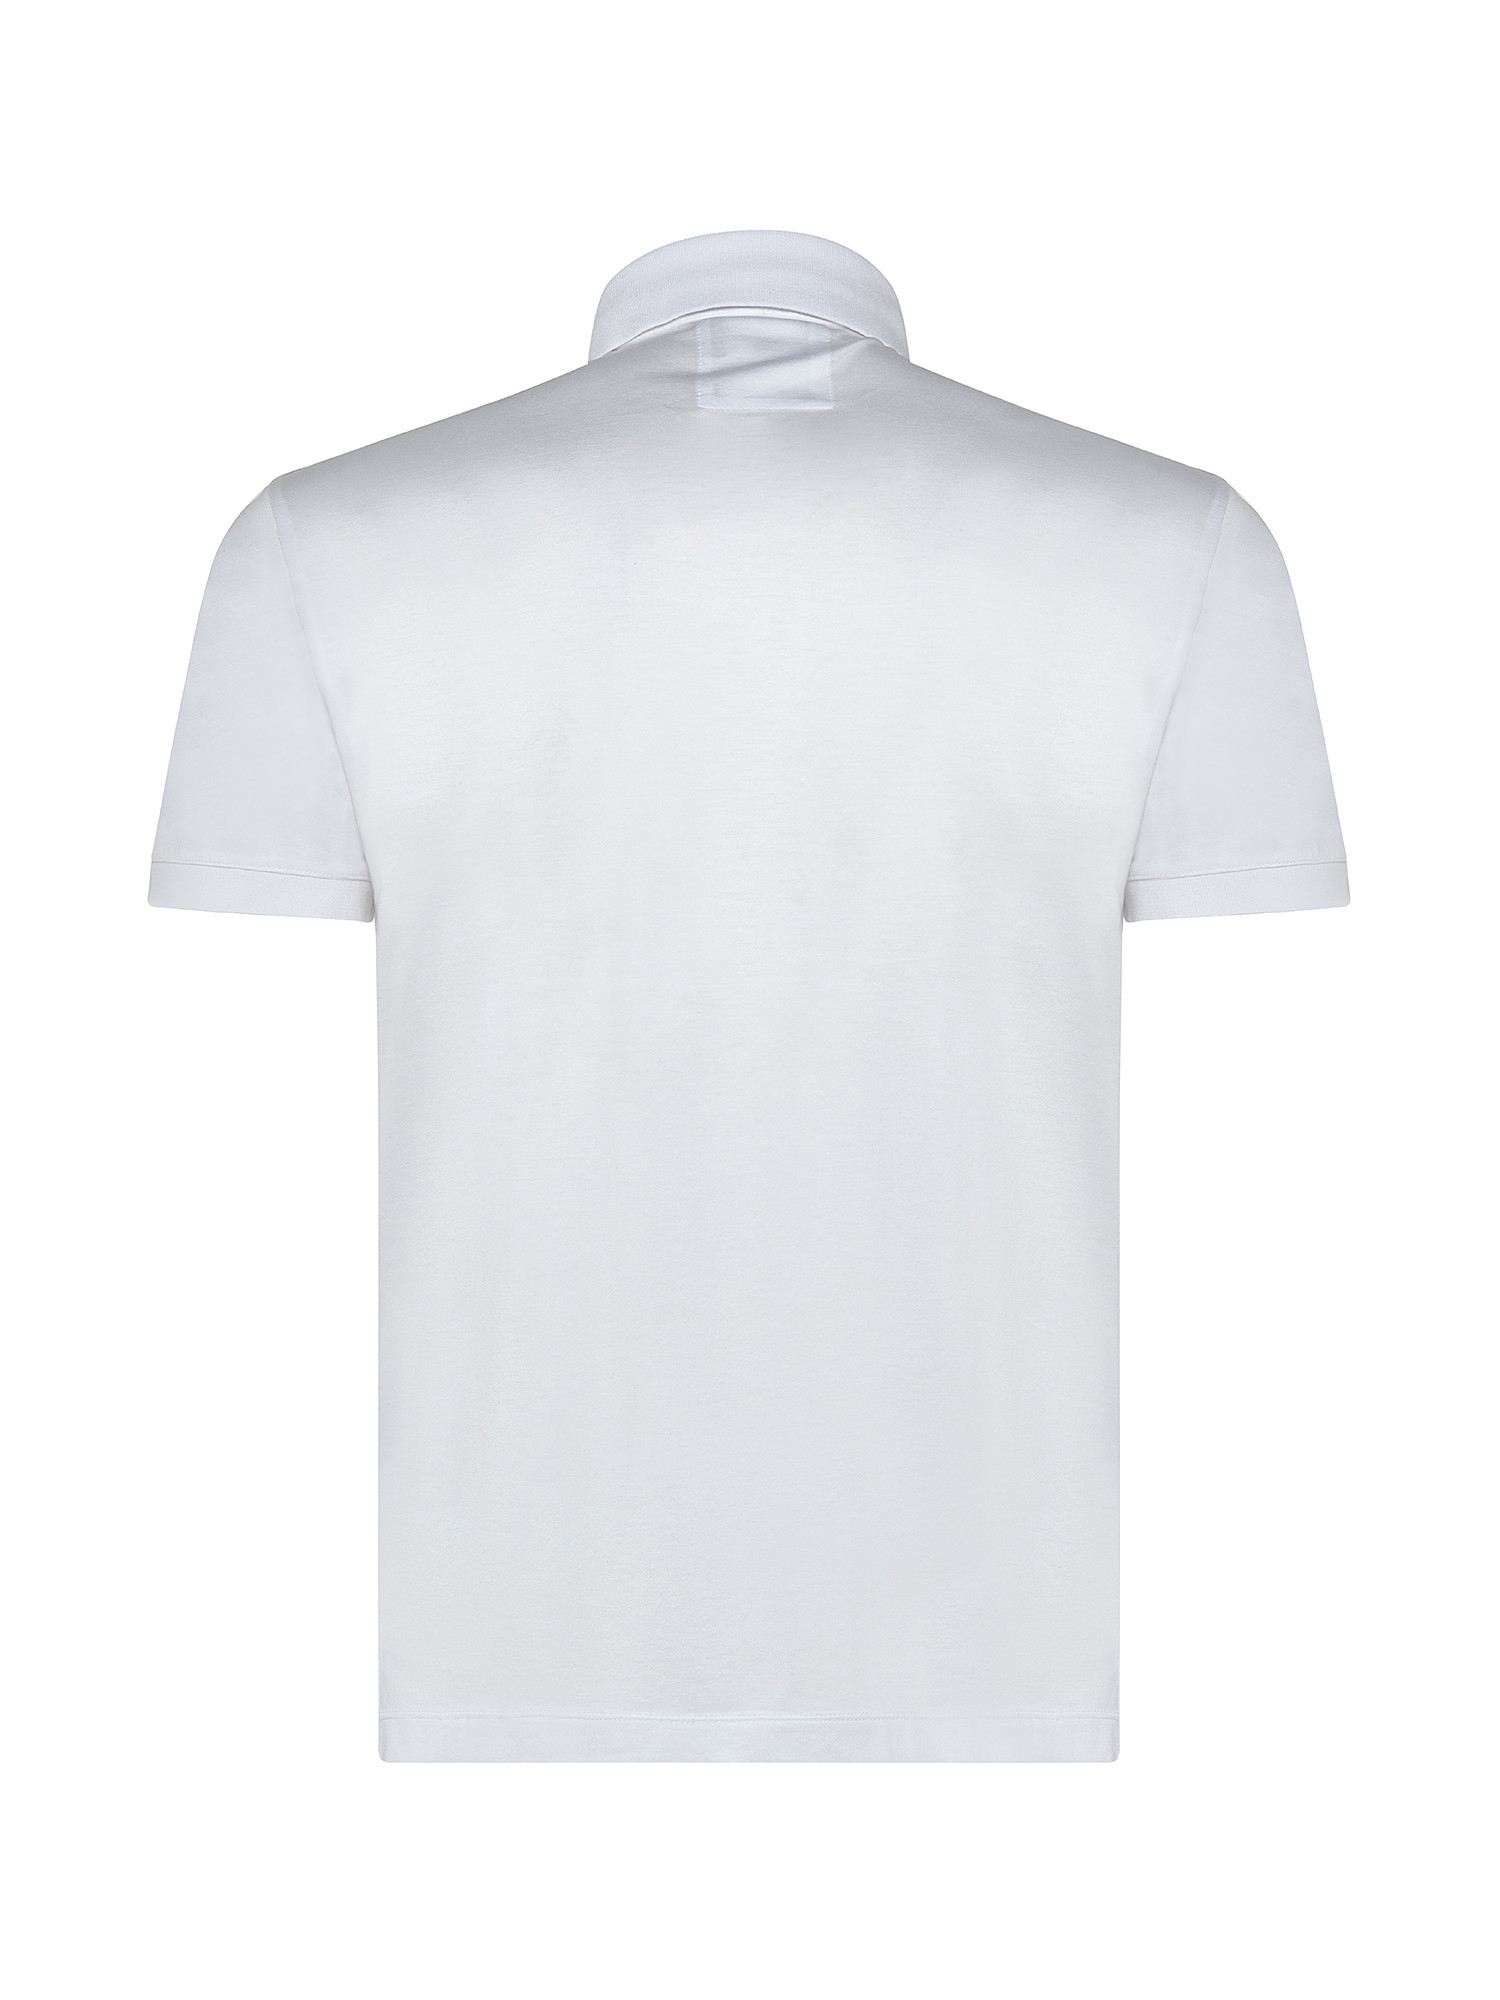 Polo, White, large image number 1